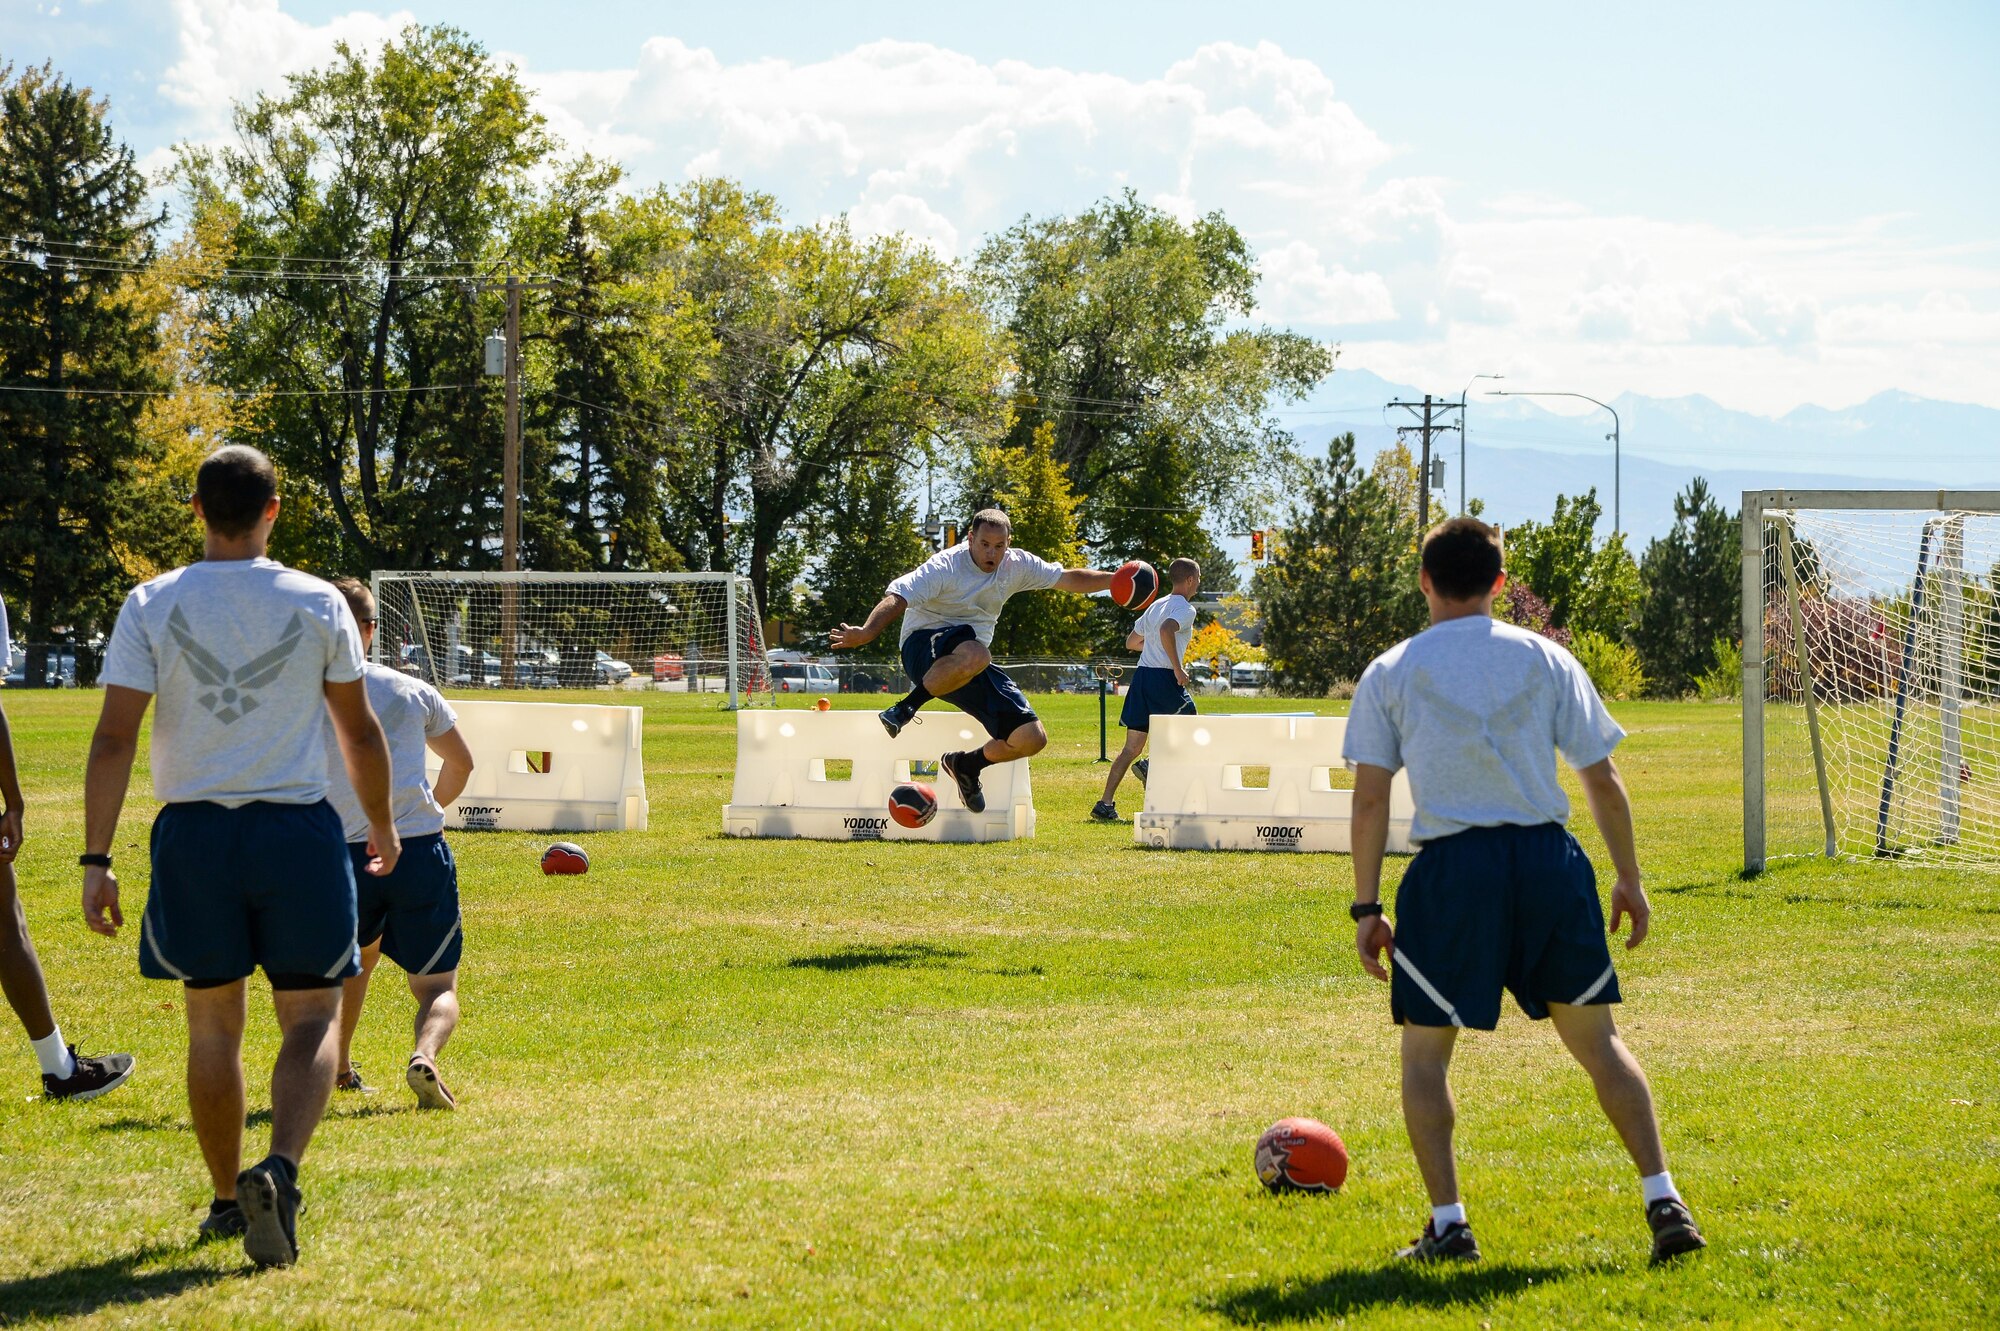 Team Hill personnel participate in a dodgeball tournament during Wingman Day Sept. 30 at Hill Air Force Base. (U.S. Air Force by R. Nial Bradshaw)